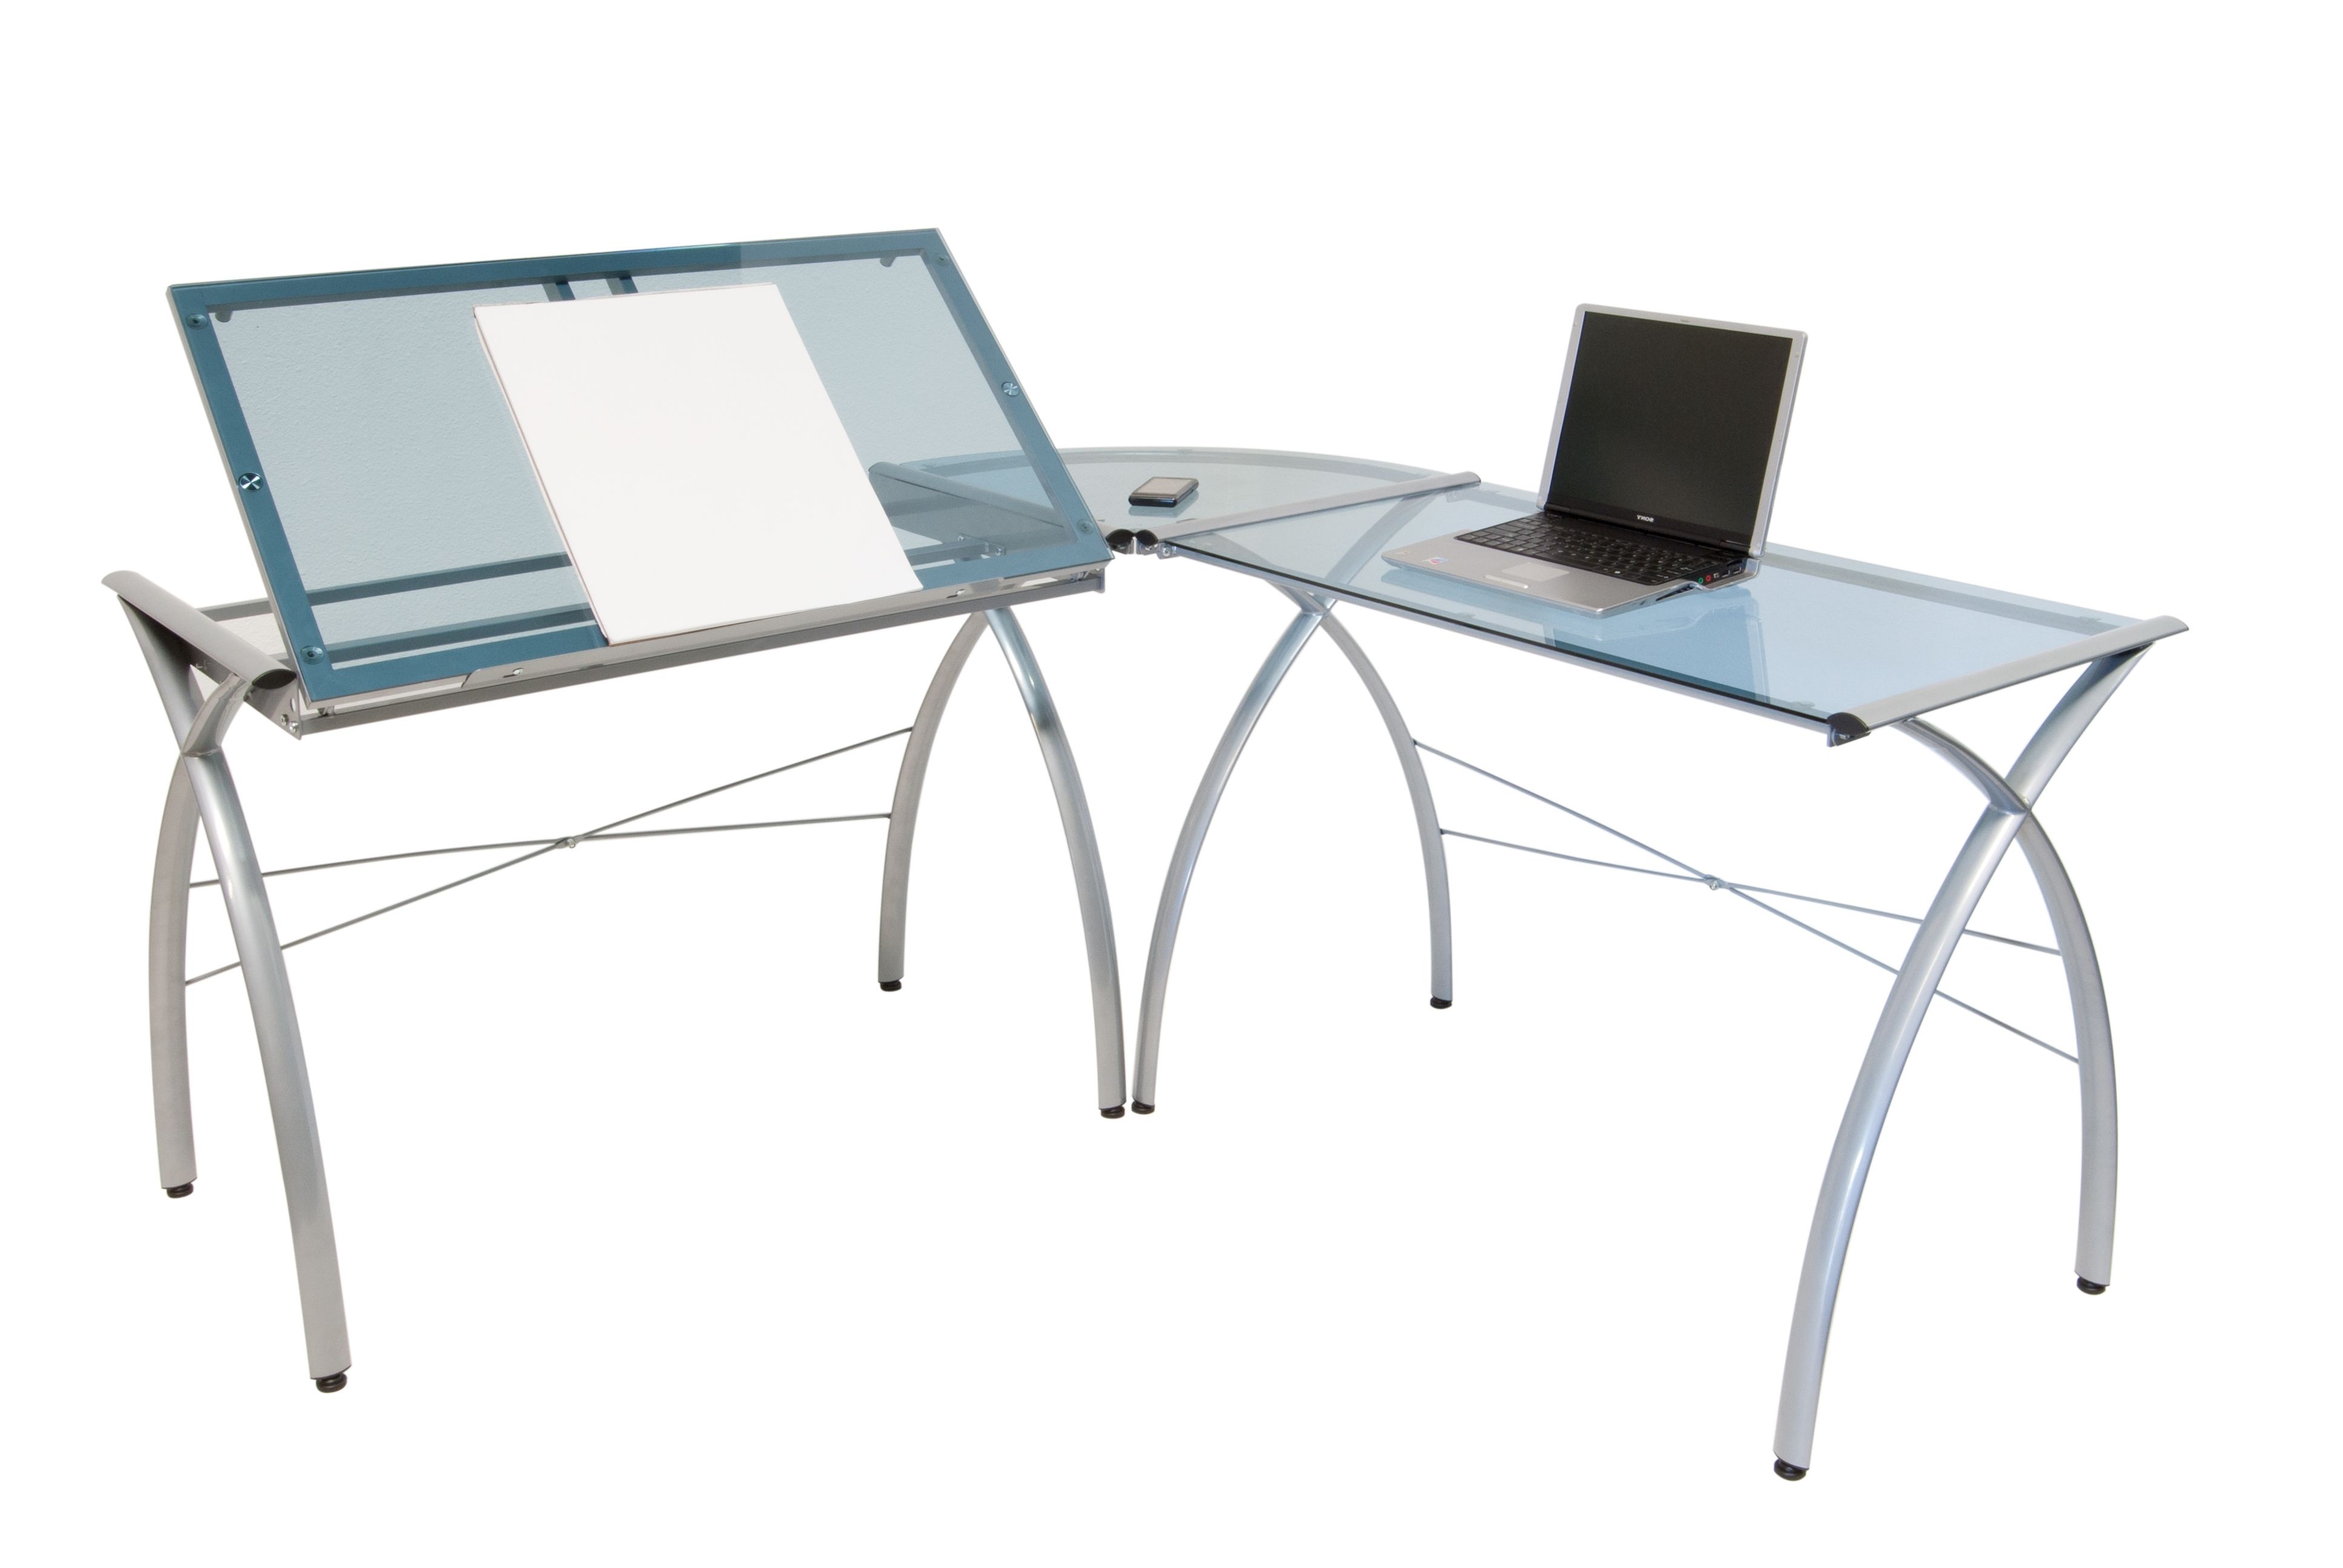 Studio Designs Futura L Shaped Desk With Tilt 50306 Throughout 2019 Computer Drafting Desks (View 3 of 20)